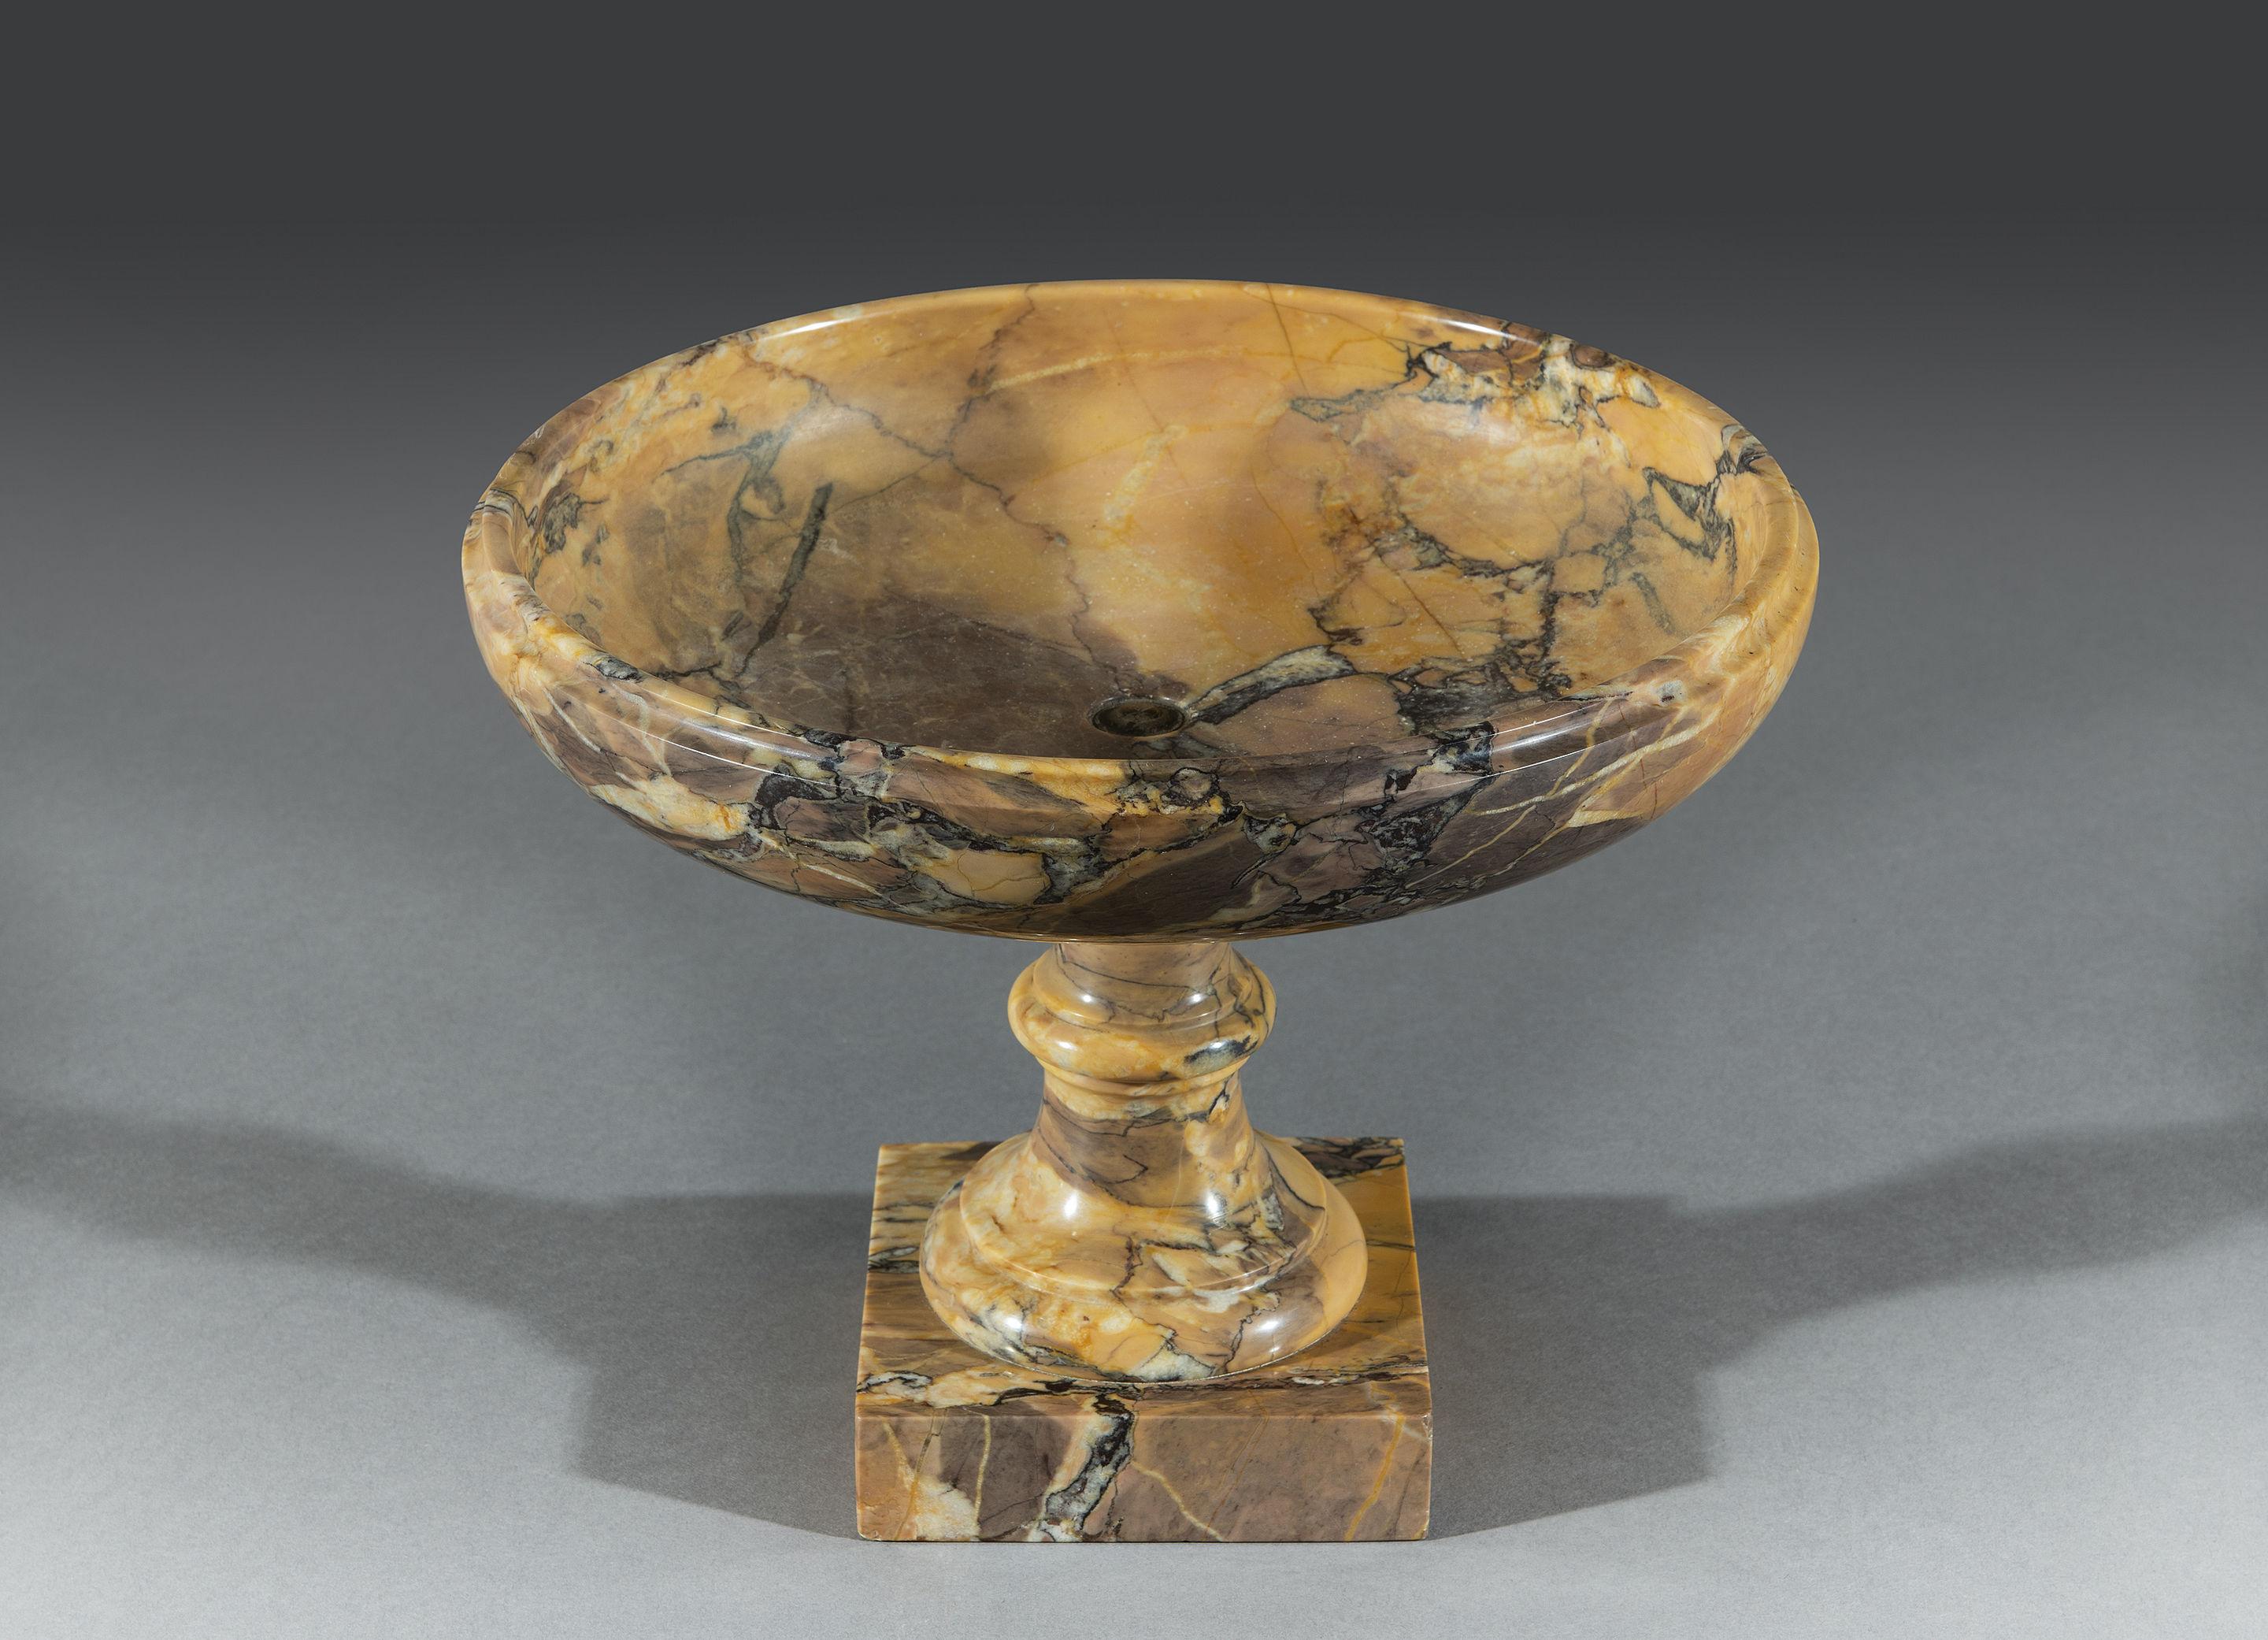 The Sienna marble Tazza has a striking vein of color flowing the through the entire ornament. The shallow dish is carved with a thumbnail molded edge and stands on a turned column supported on Socle plinth base. 

'Broccatello di Siena' (Convent